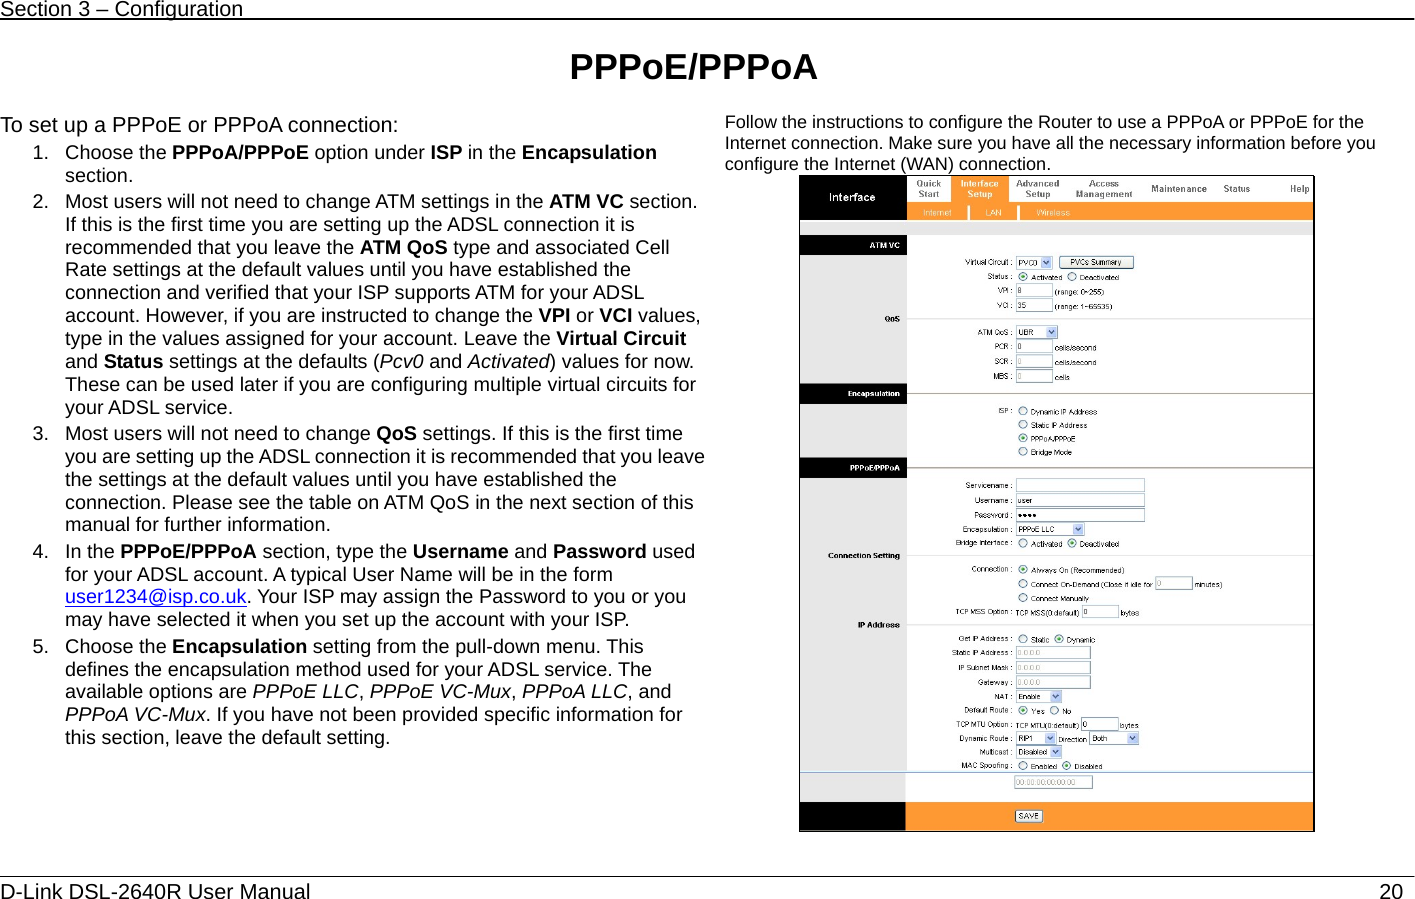 Section 3 – Configuration   D-Link DSL-2640R User Manual                           20PPPoE/PPPoA  To set up a PPPoE or PPPoA connection: 1. Choose the PPPoA/PPPoE option under ISP in the Encapsulation section.  2.  Most users will not need to change ATM settings in the ATM VC section. If this is the first time you are setting up the ADSL connection it is recommended that you leave the ATM QoS type and associated Cell Rate settings at the default values until you have established the connection and verified that your ISP supports ATM for your ADSL account. However, if you are instructed to change the VPI or VCI values, type in the values assigned for your account. Leave the Virtual Circuit and Status settings at the defaults (Pcv0 and Activated) values for now. These can be used later if you are configuring multiple virtual circuits for your ADSL service. 3.  Most users will not need to change QoS settings. If this is the first time you are setting up the ADSL connection it is recommended that you leave the settings at the default values until you have established the connection. Please see the table on ATM QoS in the next section of this manual for further information. 4. In the PPPoE/PPPoA section, type the Username and Password used for your ADSL account. A typical User Name will be in the form user1234@isp.co.uk. Your ISP may assign the Password to you or you may have selected it when you set up the account with your ISP. 5. Choose the Encapsulation setting from the pull-down menu. This defines the encapsulation method used for your ADSL service. The available options are PPPoE LLC, PPPoE VC-Mux, PPPoA LLC, and PPPoA VC-Mux. If you have not been provided specific information for this section, leave the default setting.     Follow the instructions to configure the Router to use a PPPoA or PPPoE for the Internet connection. Make sure you have all the necessary information before you configure the Internet (WAN) connection.    